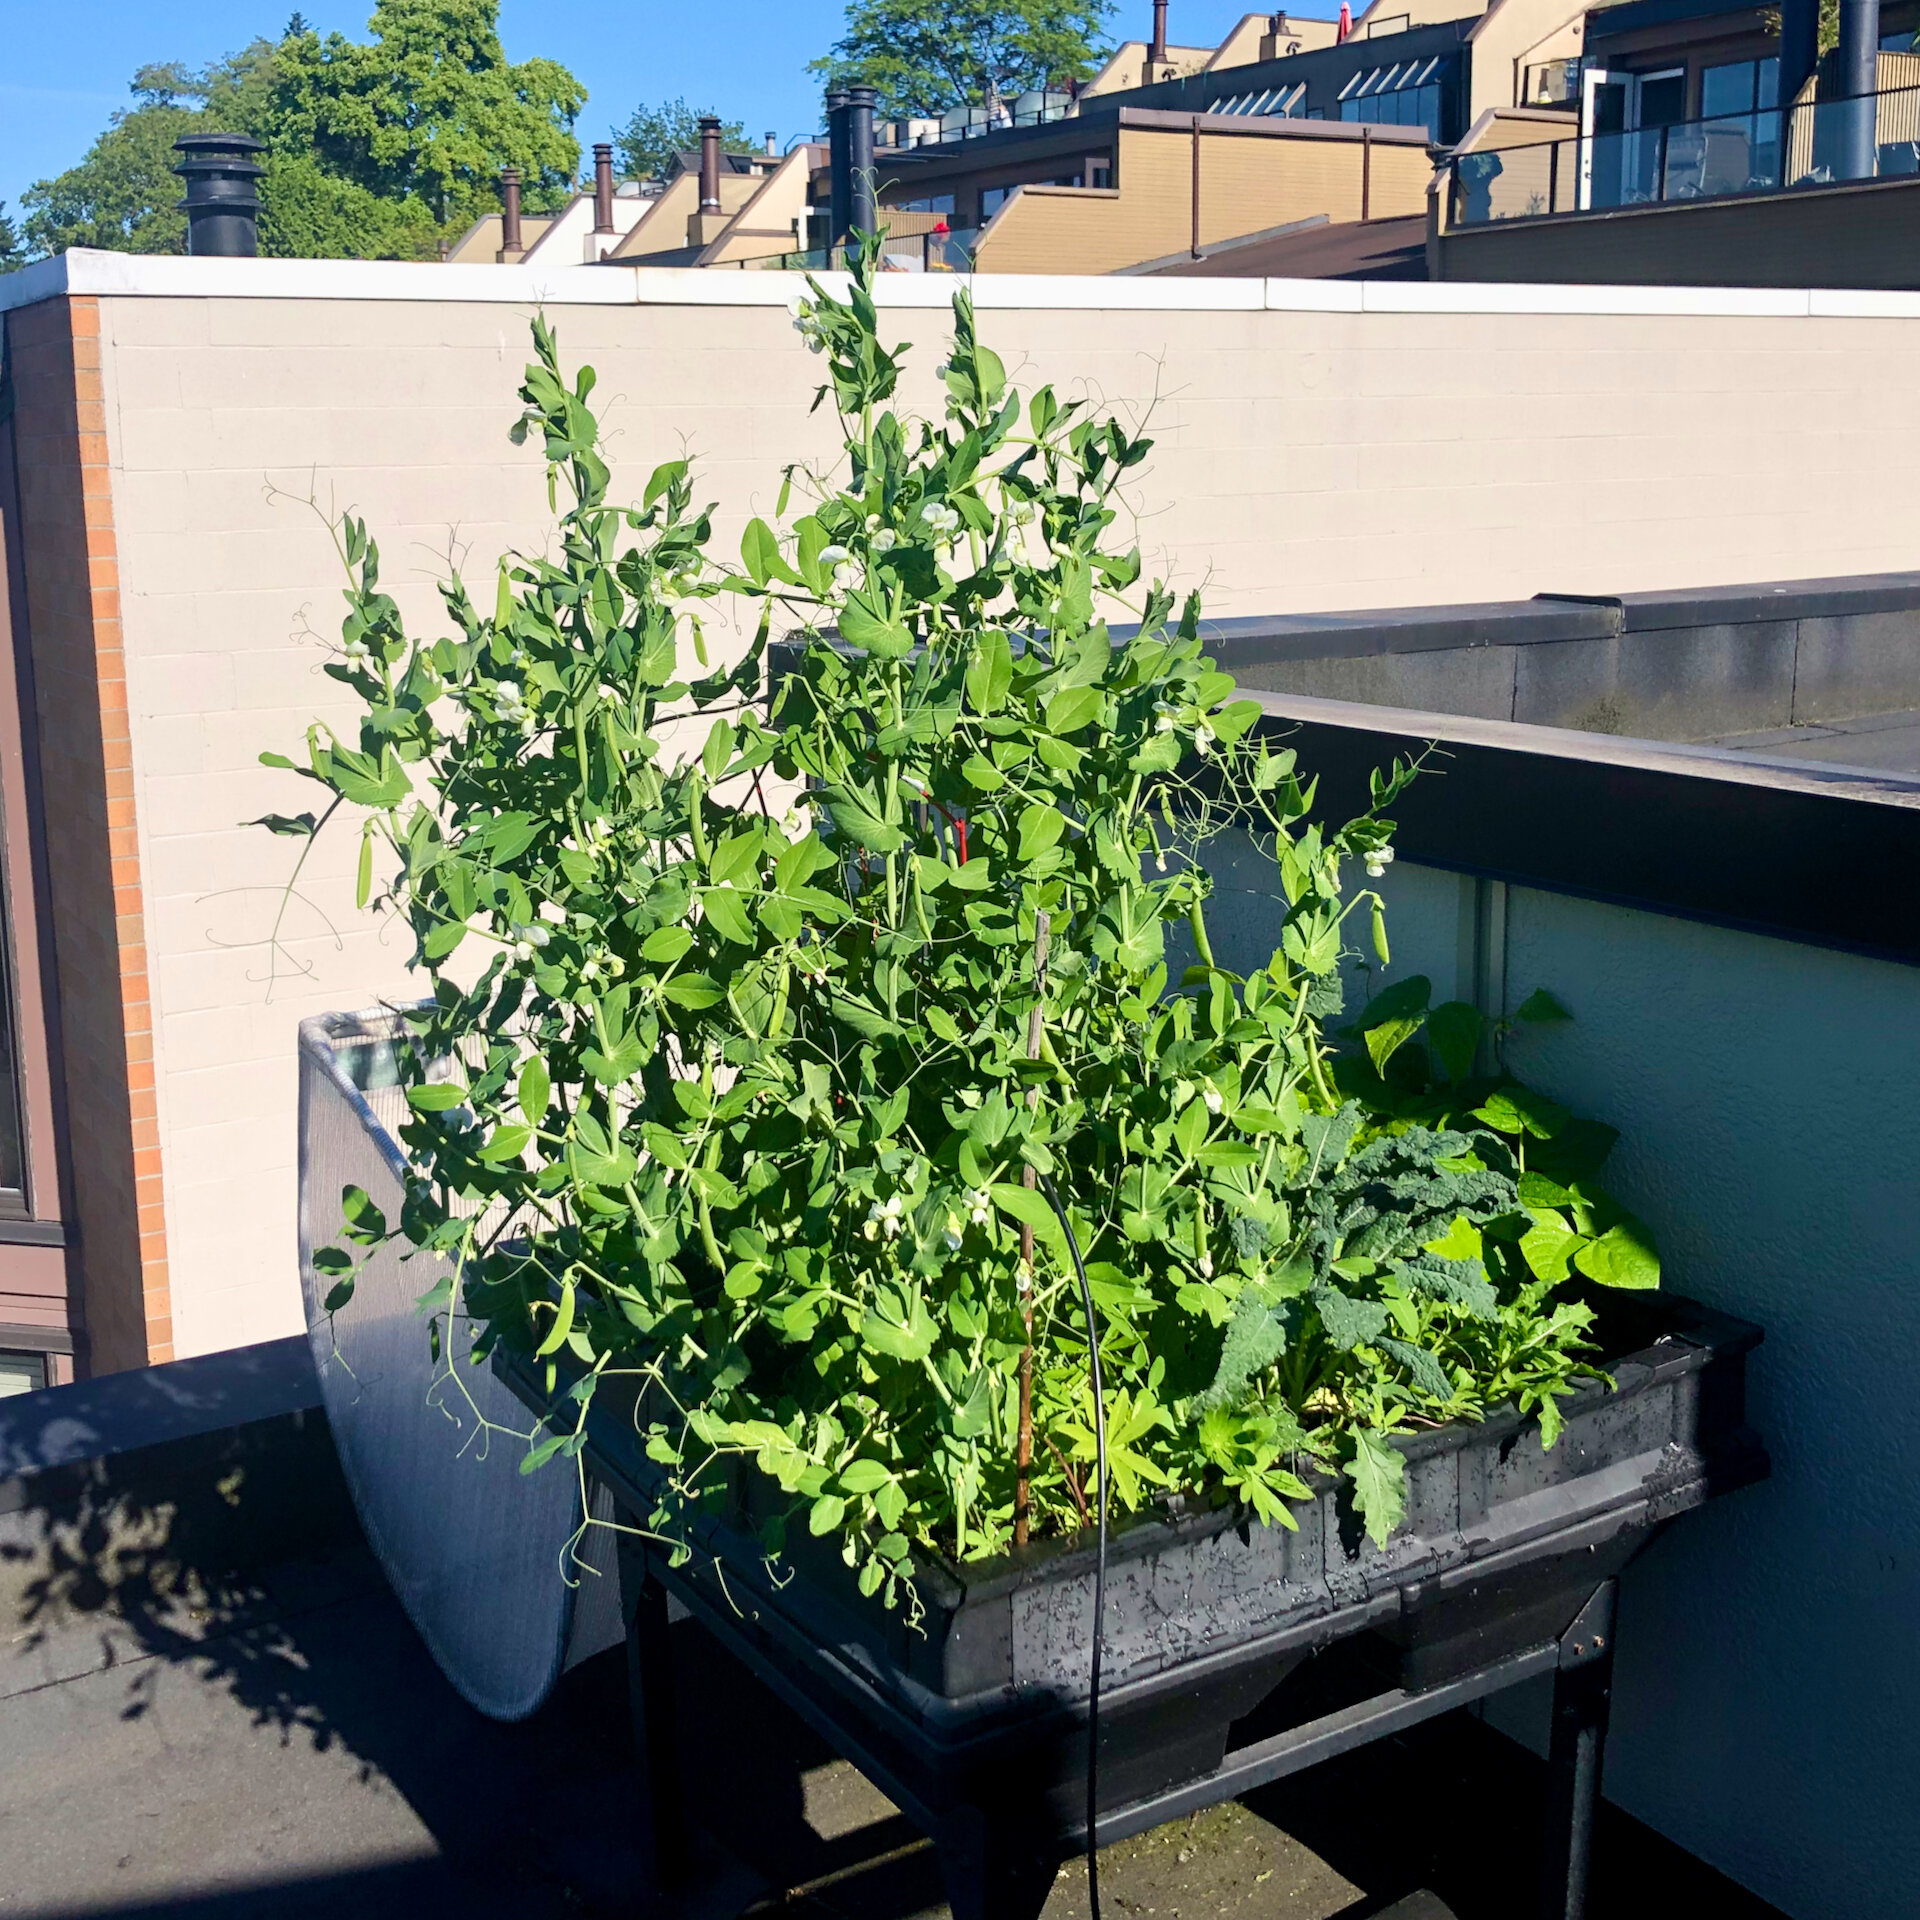  The veggie garden box has had it’s best year ever! The peas have gone crazy, and are growing like mad. They’ve completely taken over, and I need to string up the little trellis (attached it to the balcony railing)  I added so it wouldn’t collapse un